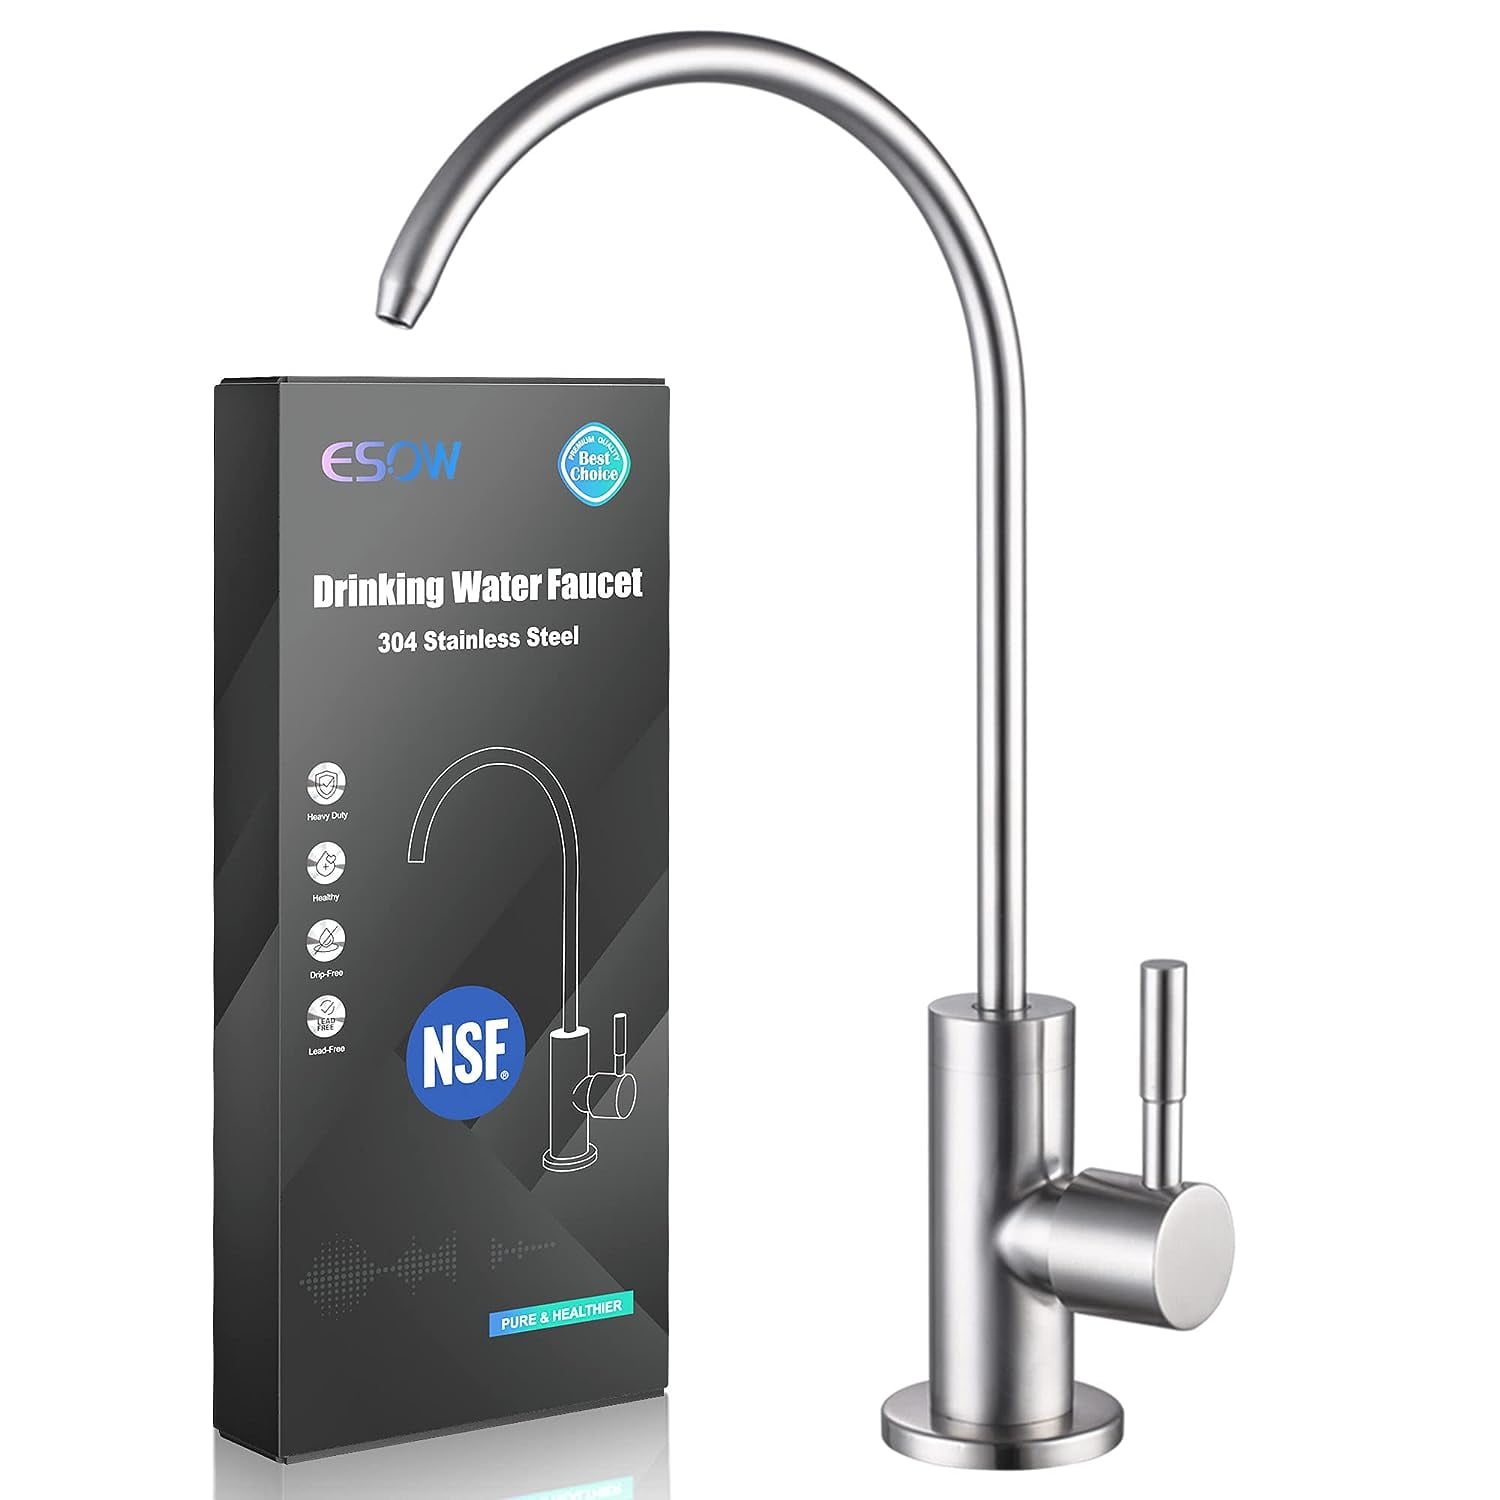 XOXO Filter Kitchen Faucet, 360 Rotation Black Mixer Tap W/ Pure Water  Filter For Clean Drinking Water Deck Mounted Sink Tap From Xue10, $76.56